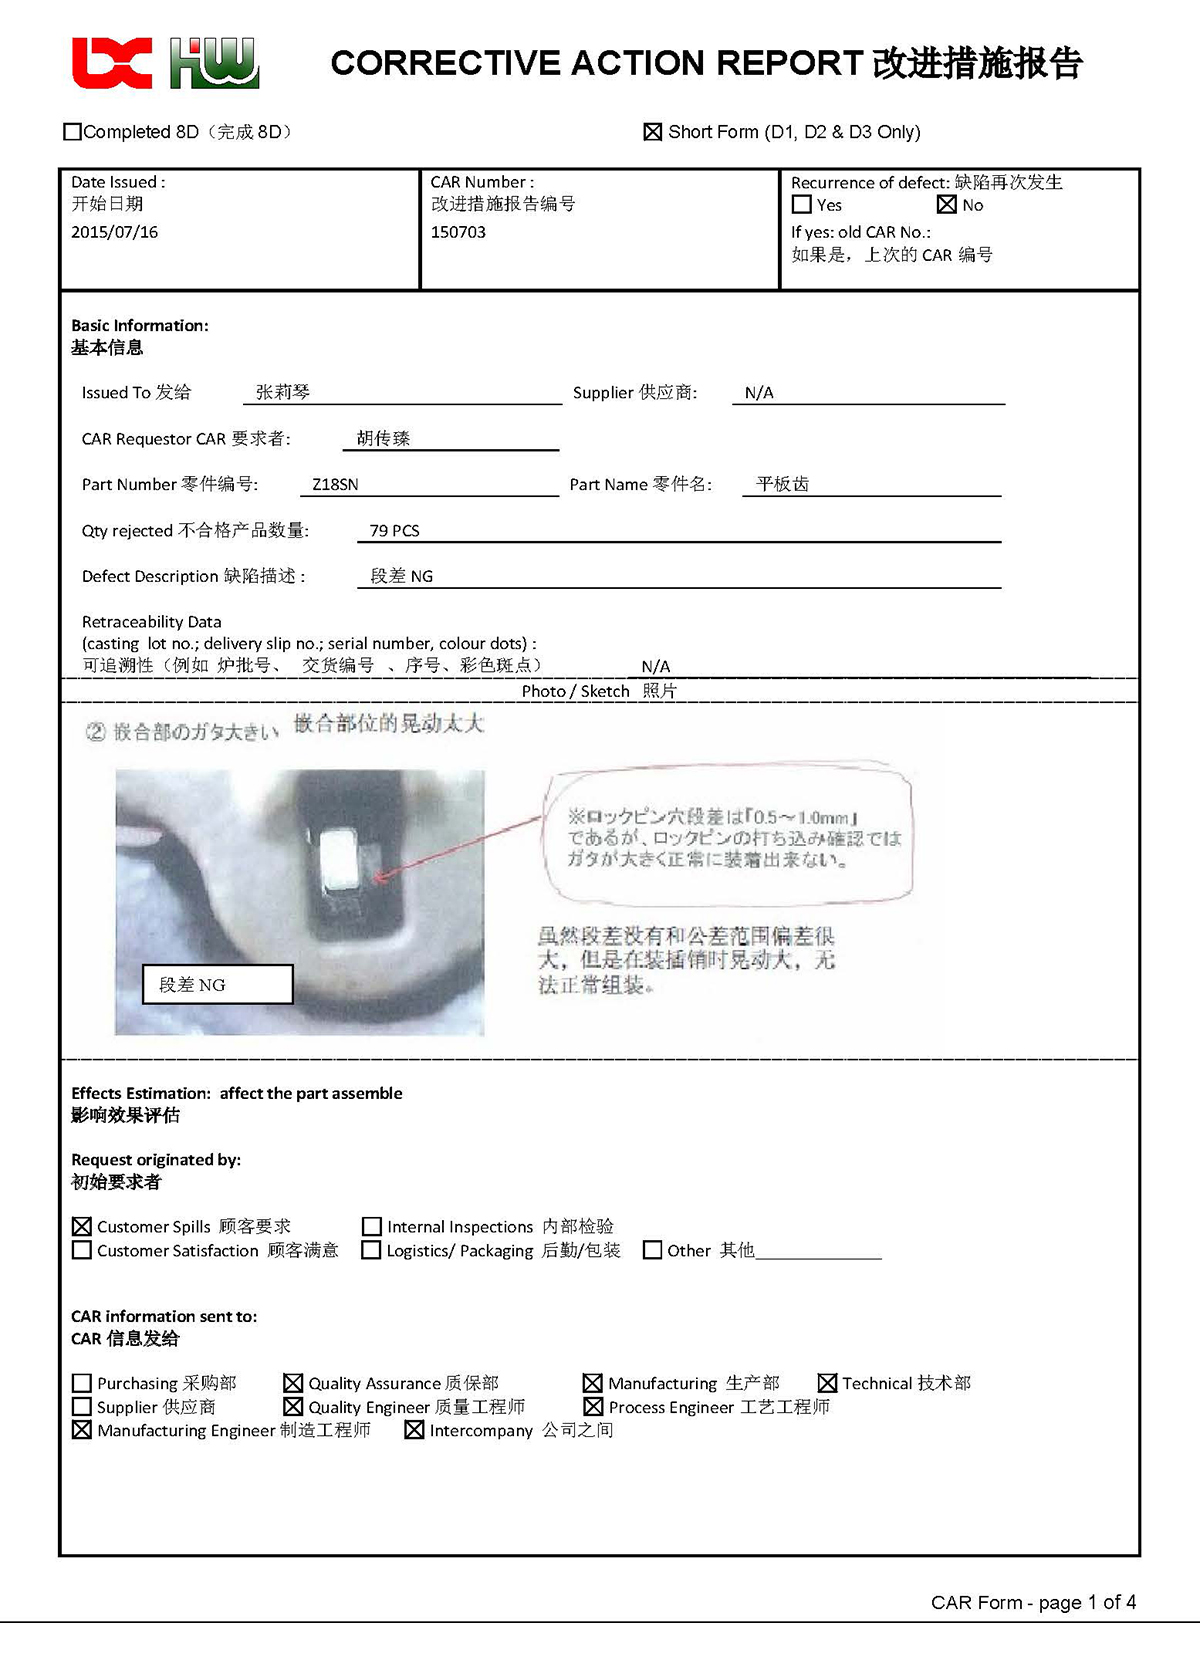 Corrective Action Report(8D)(图1)